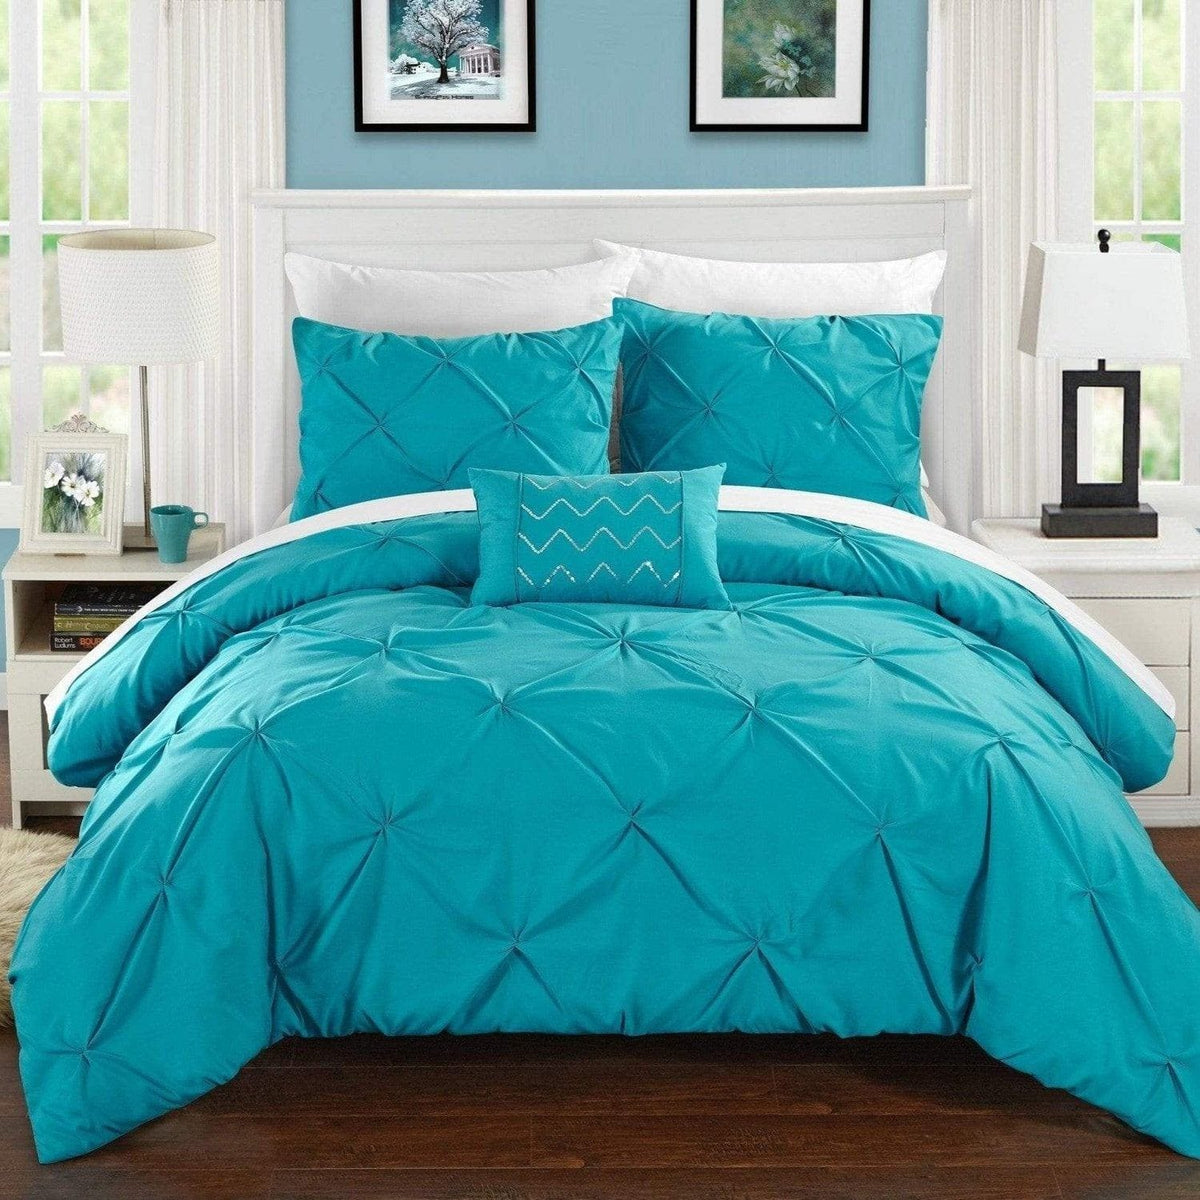 Chic Home Daya 4 Piece Pinch Pleat Duvet Cover Set Turquoise